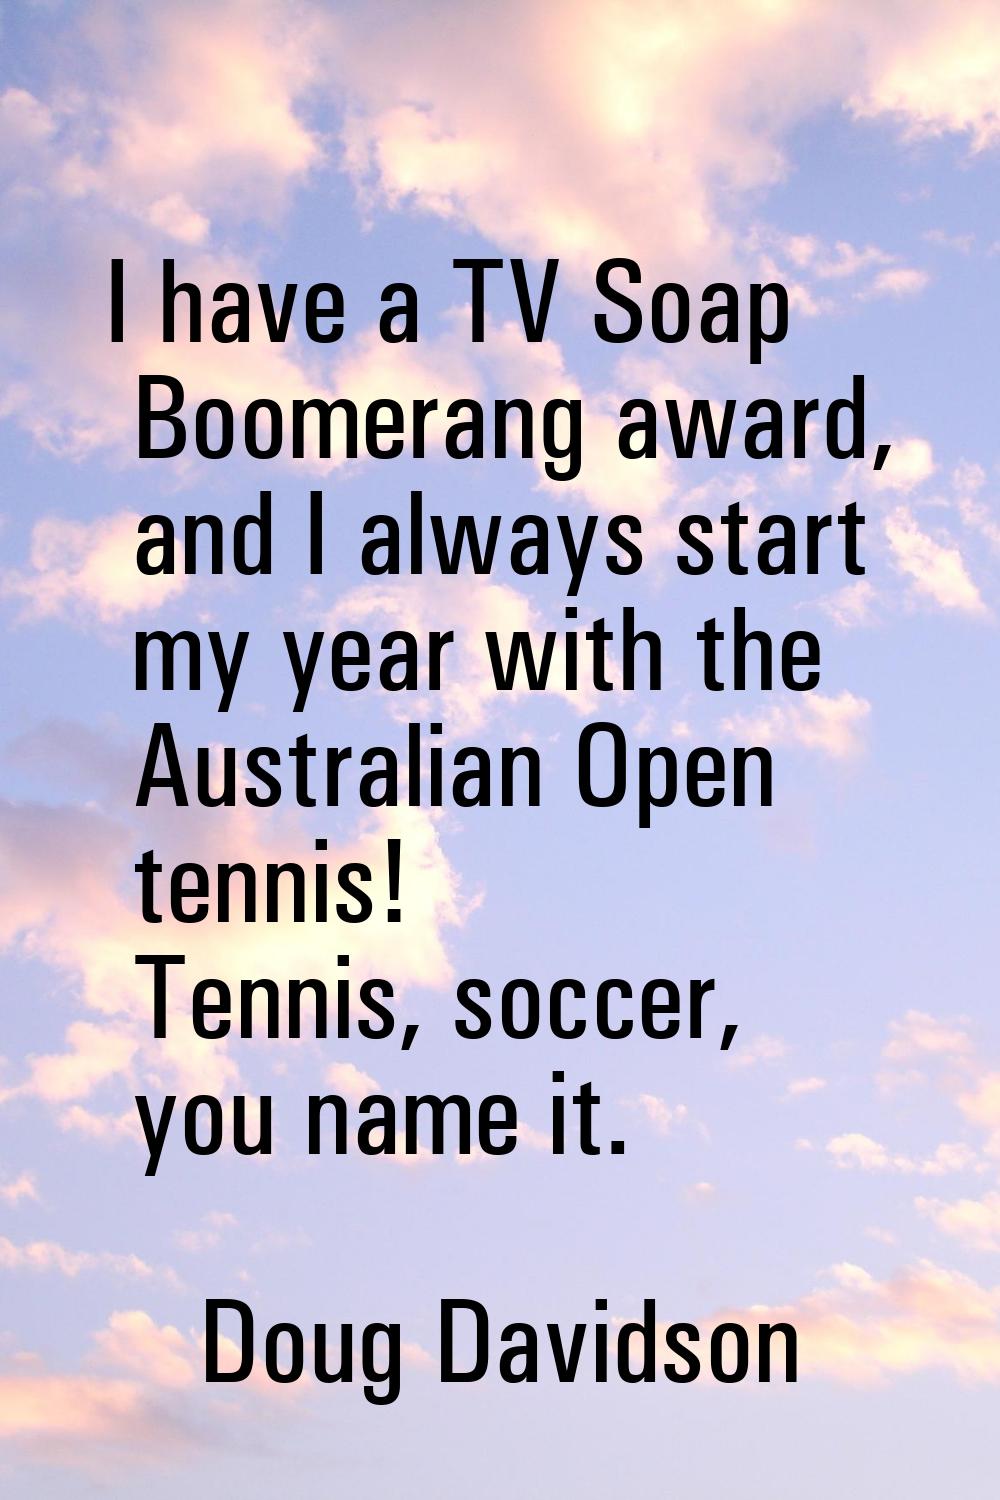 I have a TV Soap Boomerang award, and I always start my year with the Australian Open tennis! Tenni